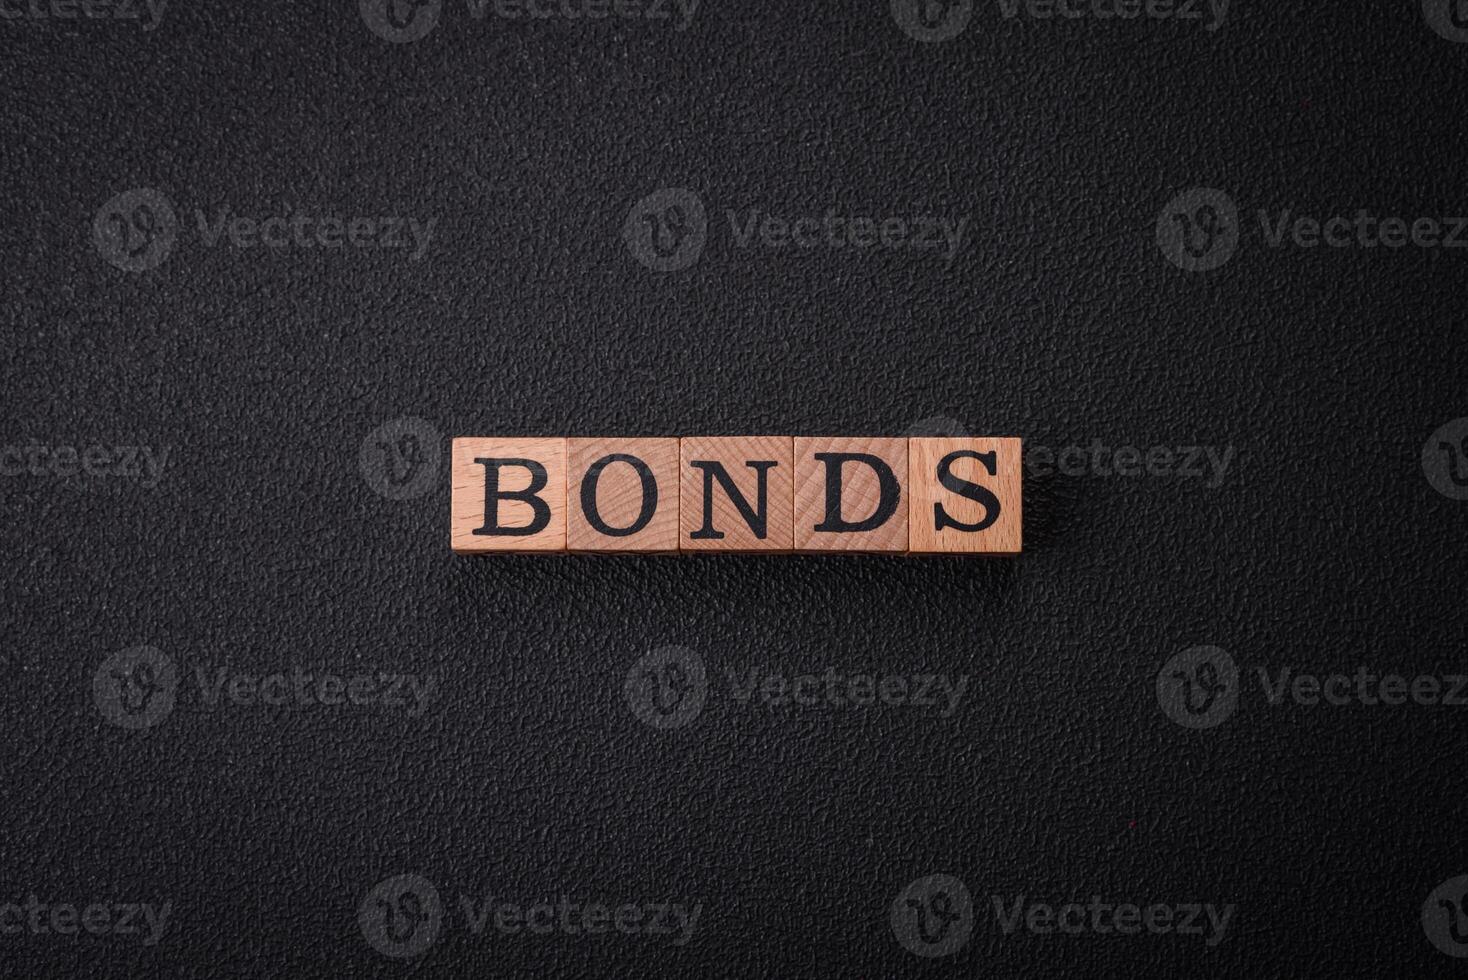 The inscription Bonds made of wooden cubes on a plain background photo